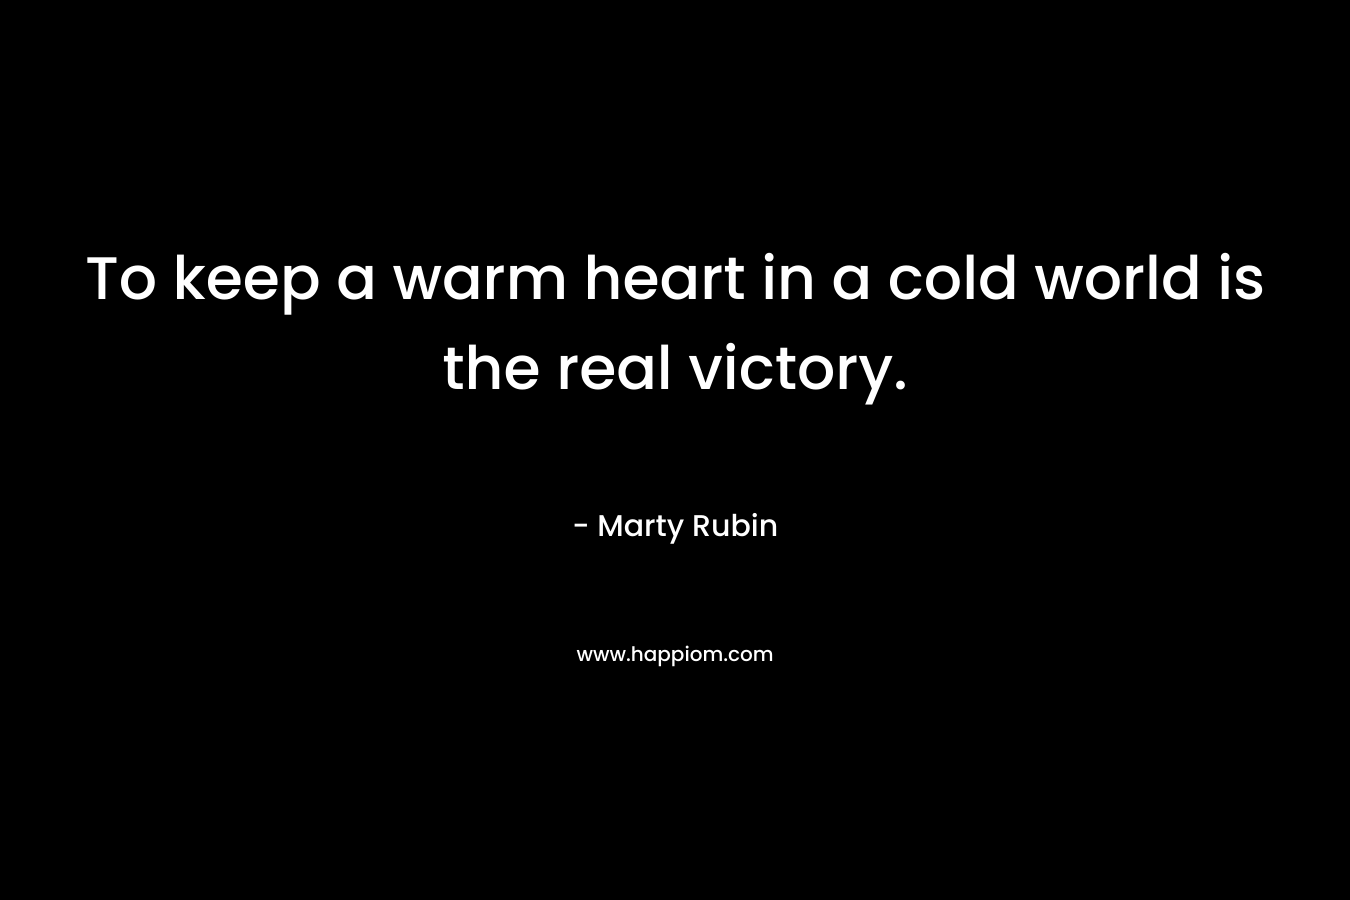 To keep a warm heart in a cold world is the real victory.